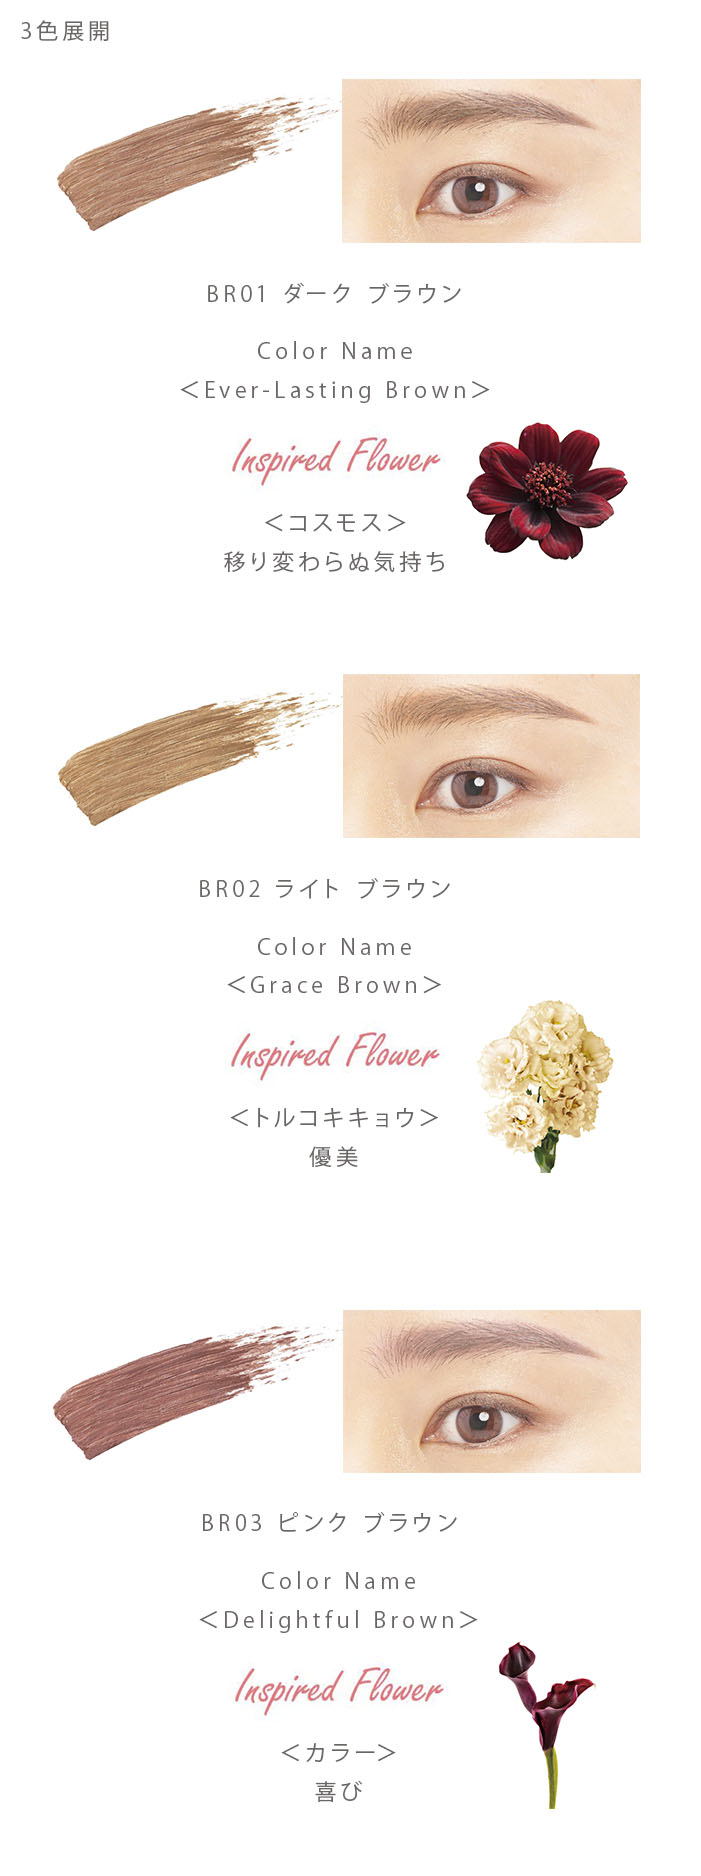 BR01ダーク ブラウン Color Name＜Ever-Lasting Brown＞InspiredFlower＜コスモス＞移り変わらぬ気持ち、BR02 ライト ブラウン Color Name＜Grace Brown＞InspiredFlower＜トルコキキョウ＞優美、BR03 ピンク ブラウン Color Name＜Delightful Brown＞InspiredFlower＜カラー＞喜び